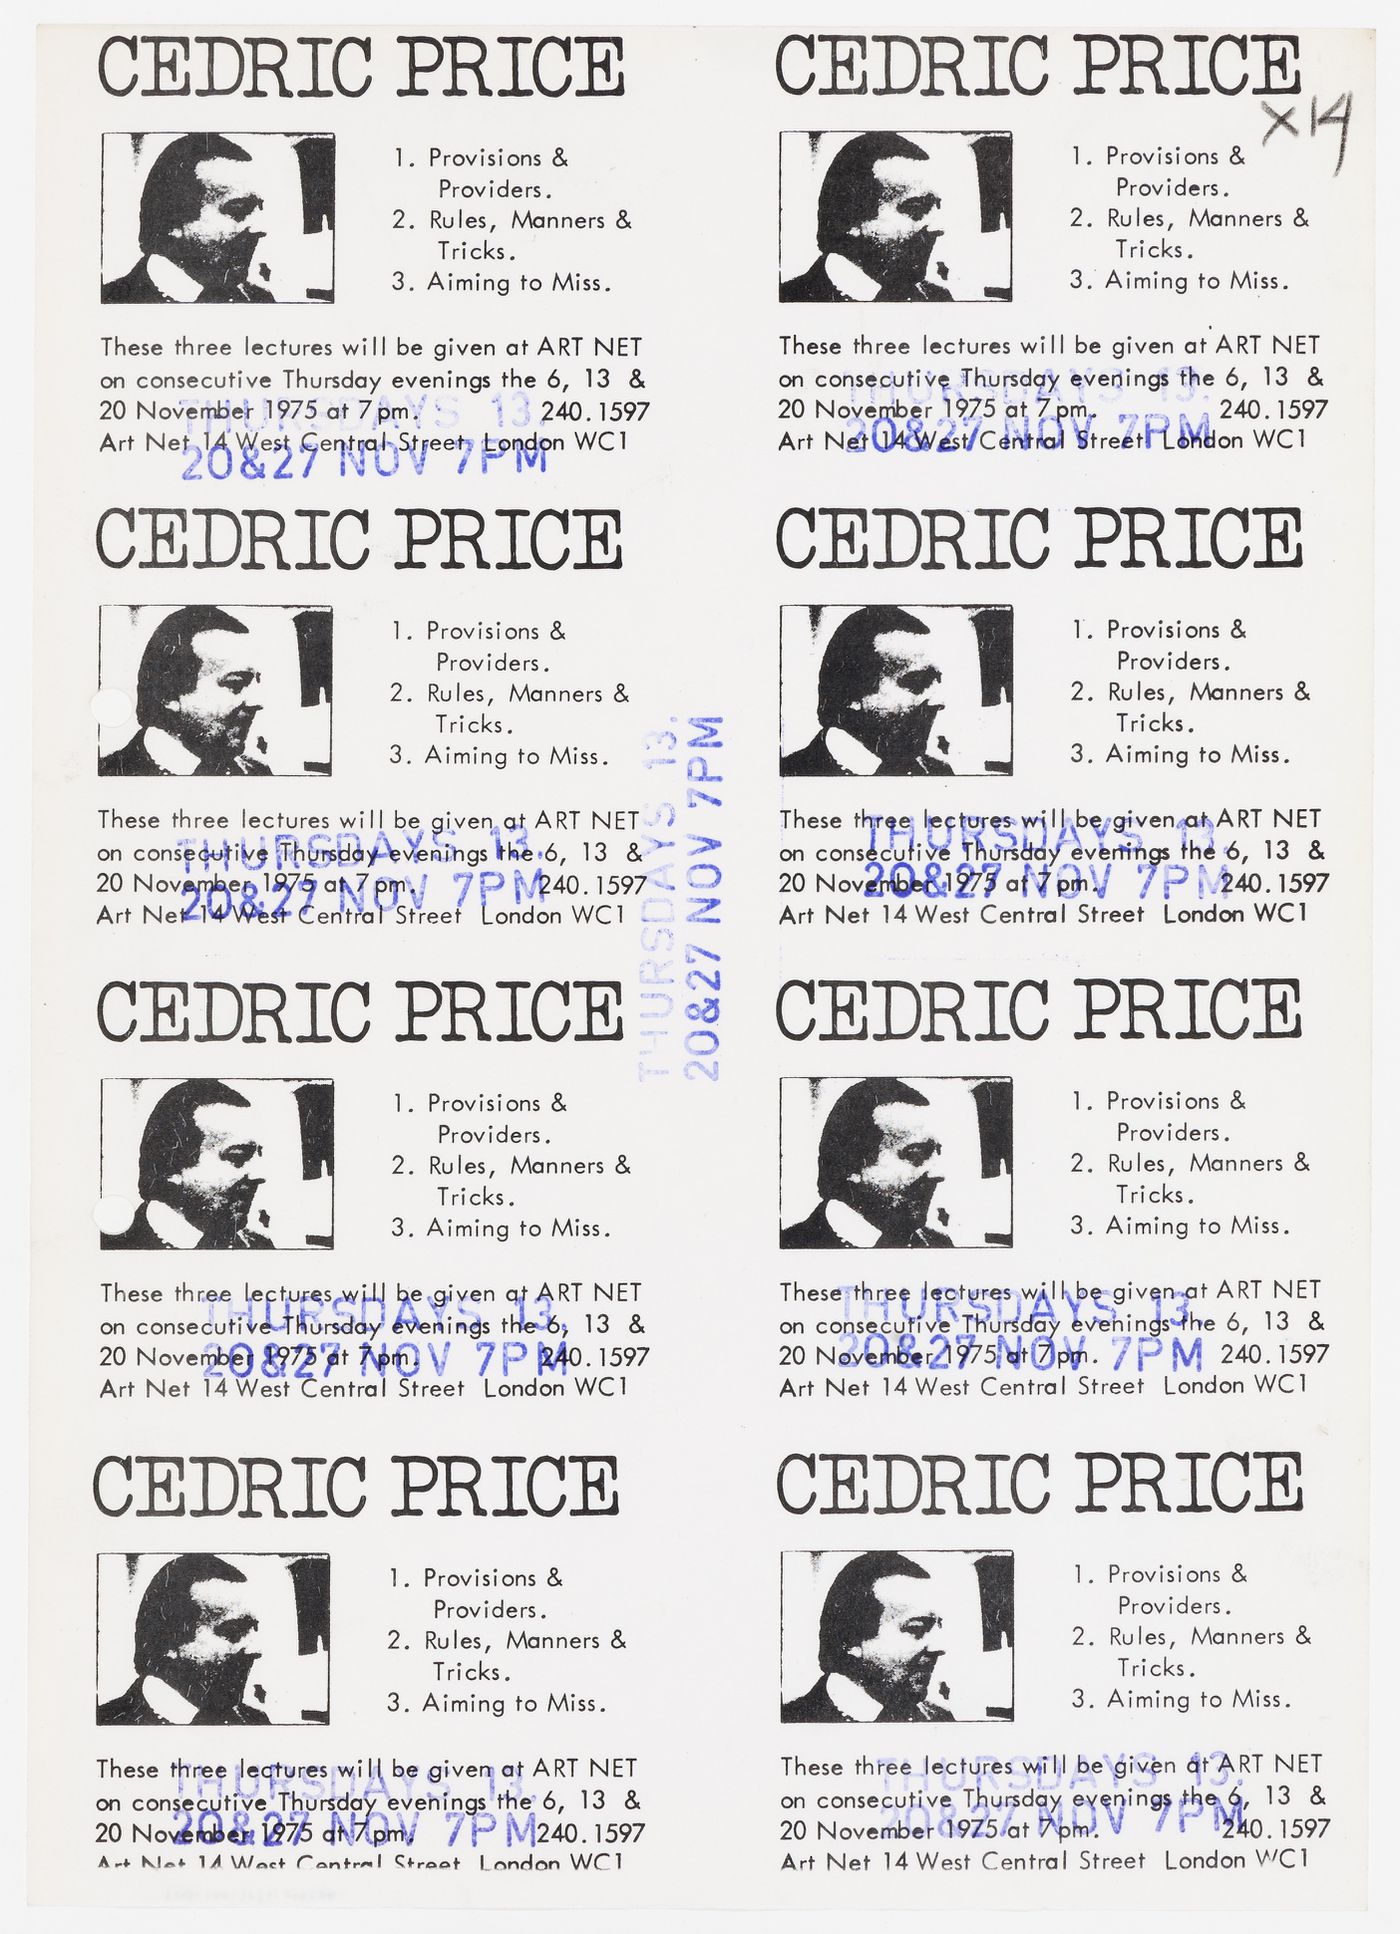 Handbill announcing three lectures by Cedric Price at Art Net on November 13, 29 and 27, 1975